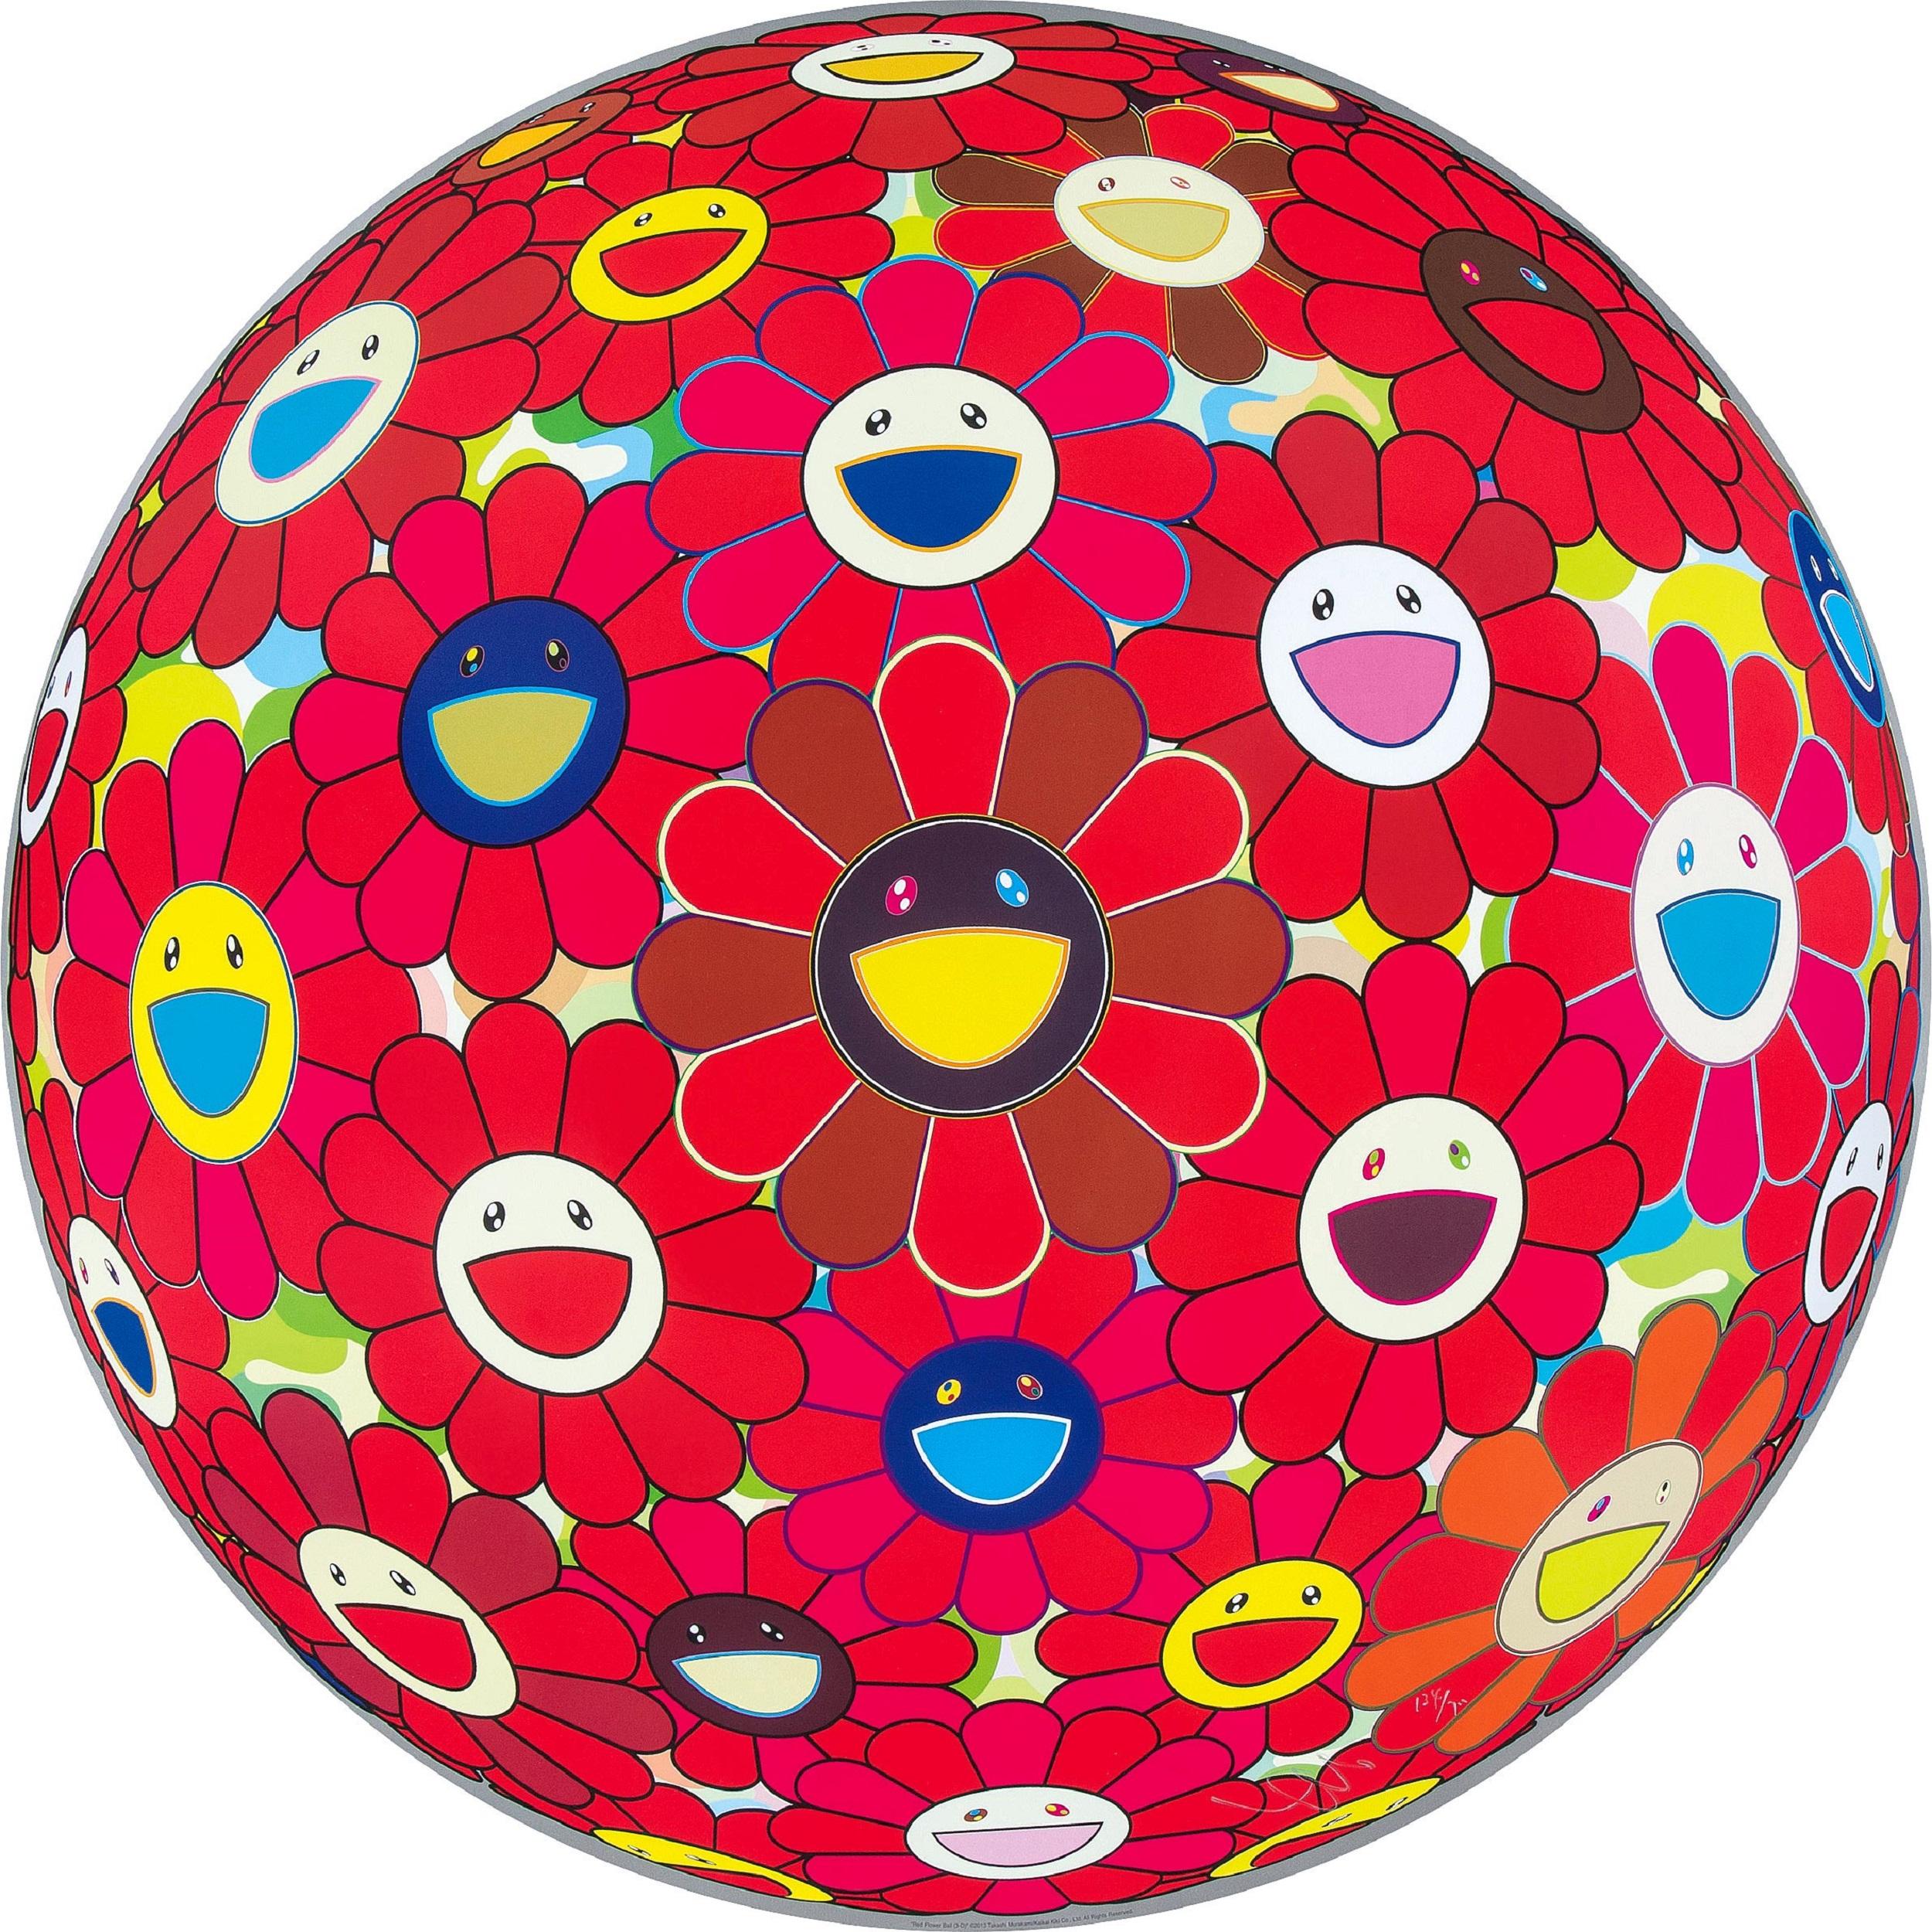 Takashi Murakami Figurative Print - Red Flowerball (3D). Limited Edition (print) by Murakami signed and numbered.